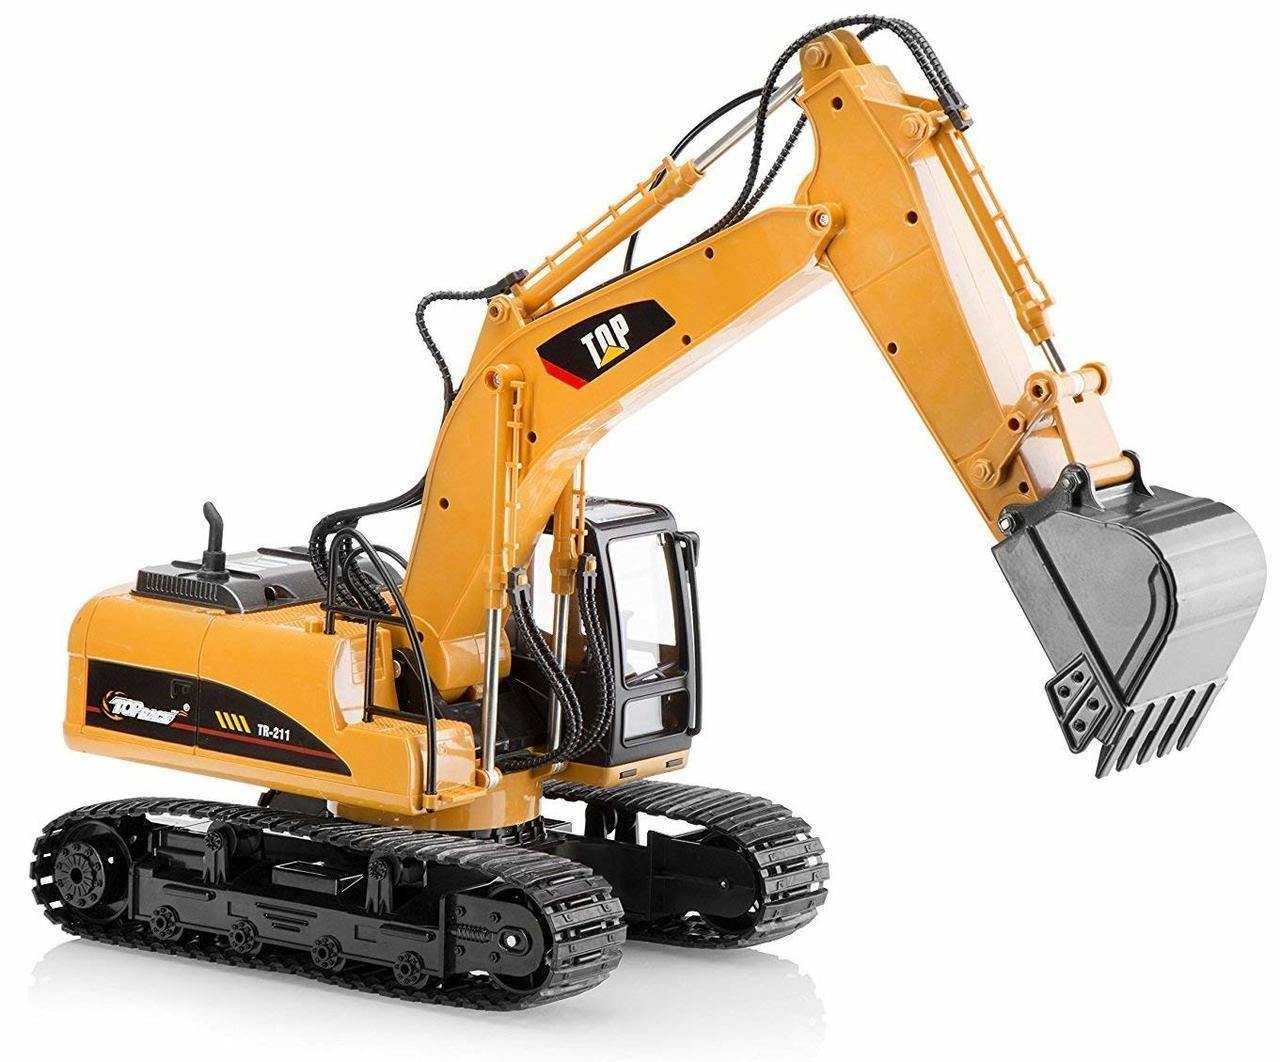 15 Channel Full Functional Remote Control Excavator Construction Tractor Toy - SquareDubai